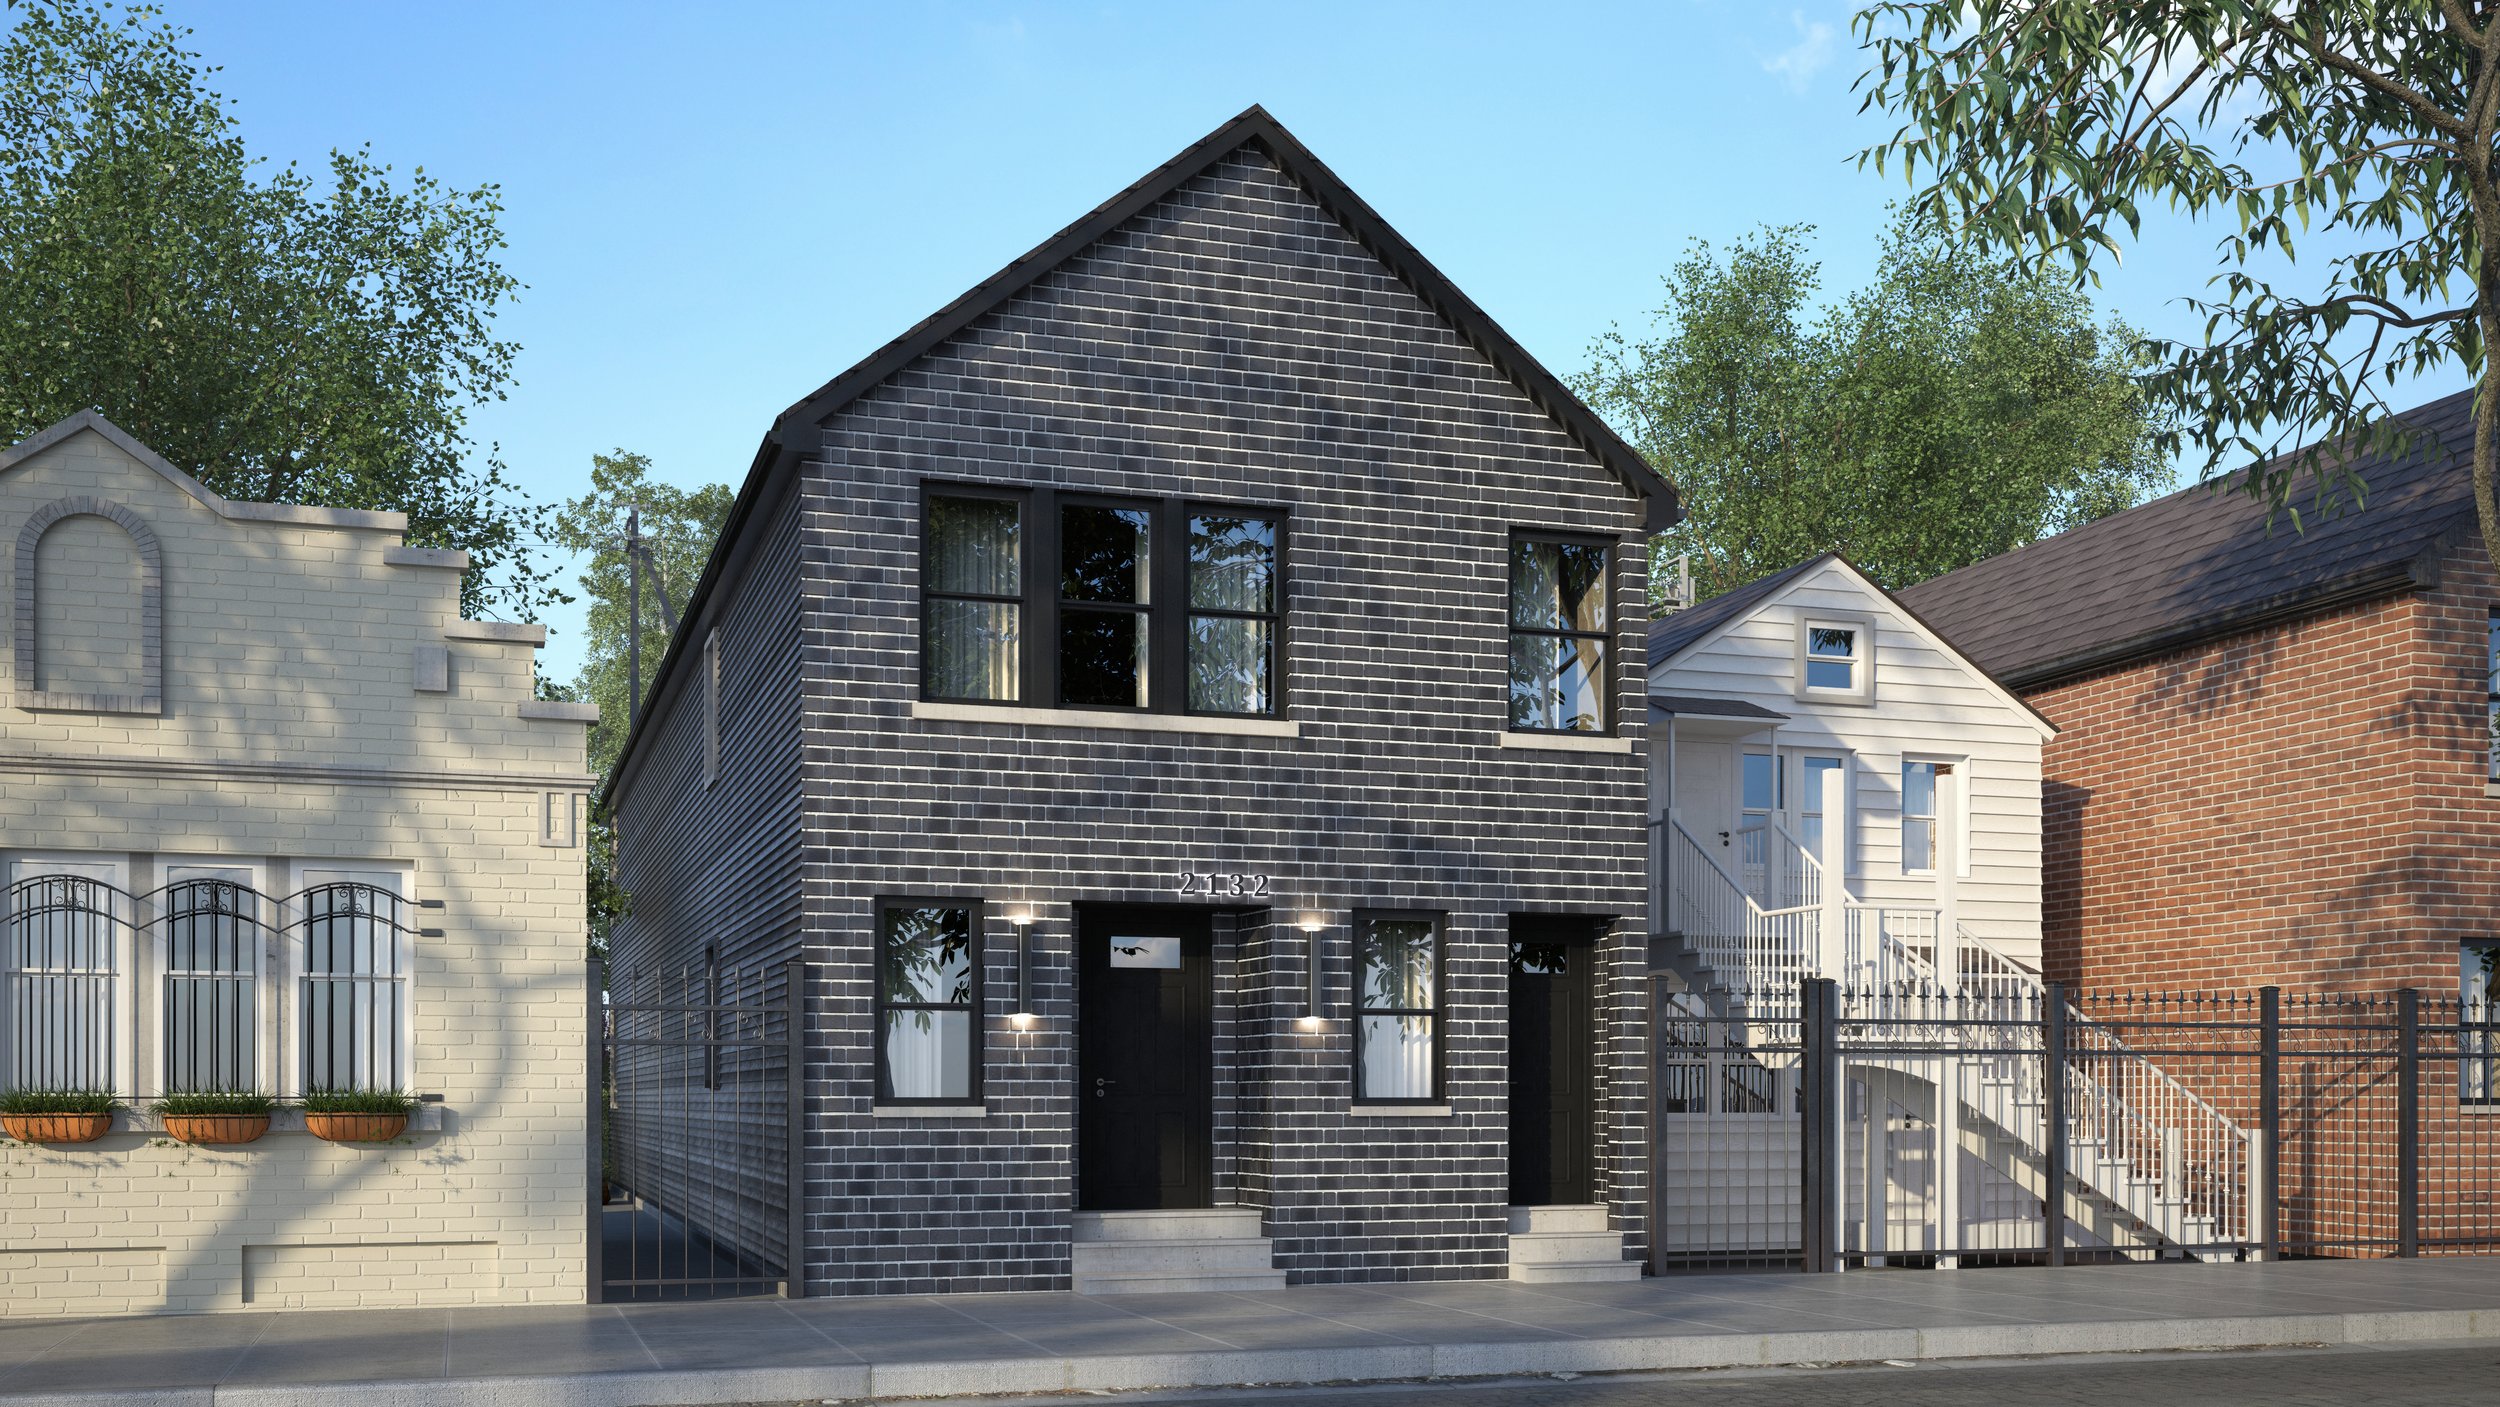 Multi-Unit Property with Black Window Trim and Doors and Black Brick